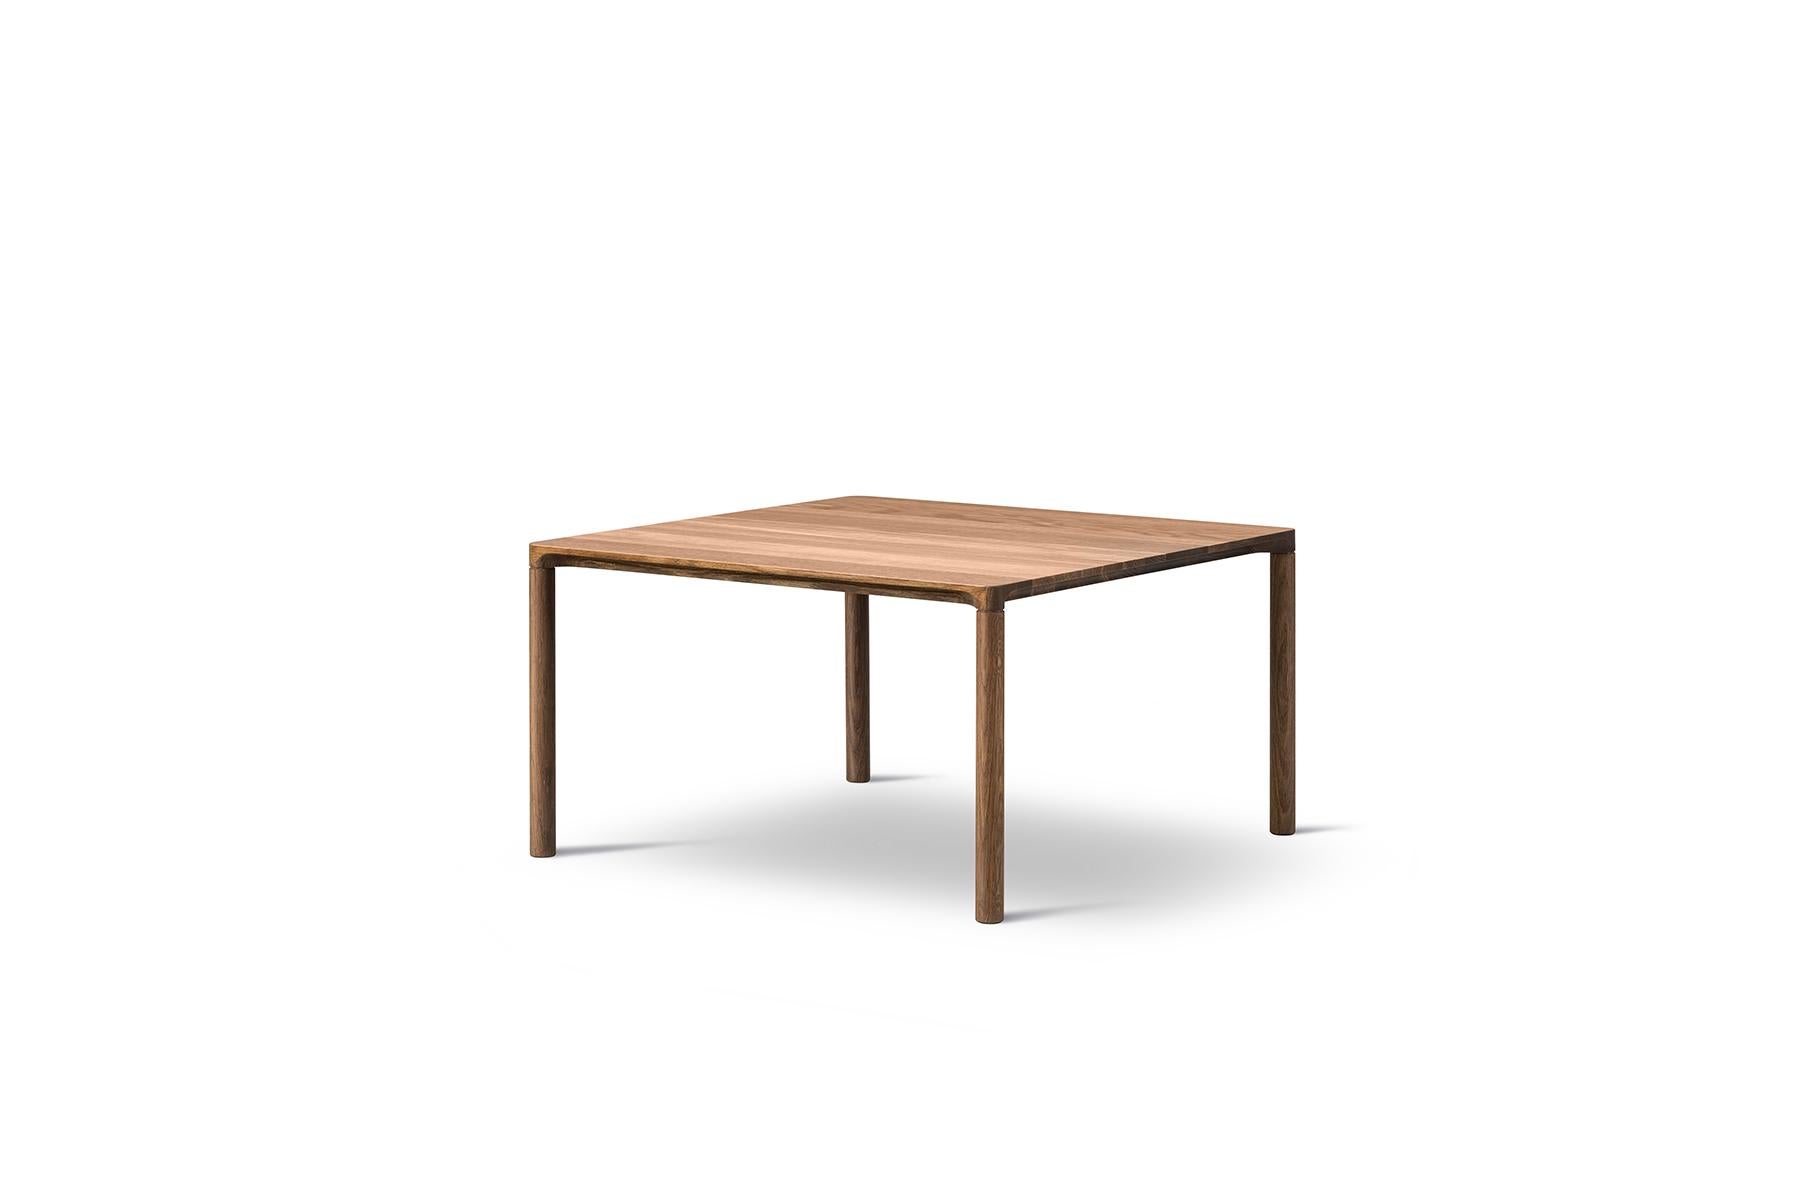 Hugo Passos Piloti table – Square is a series of solid oak side tables. The subtle detailing of the table top creates the impression of a single line, floating between four delicate legs. The tables are supplied in two heights and can be combined as